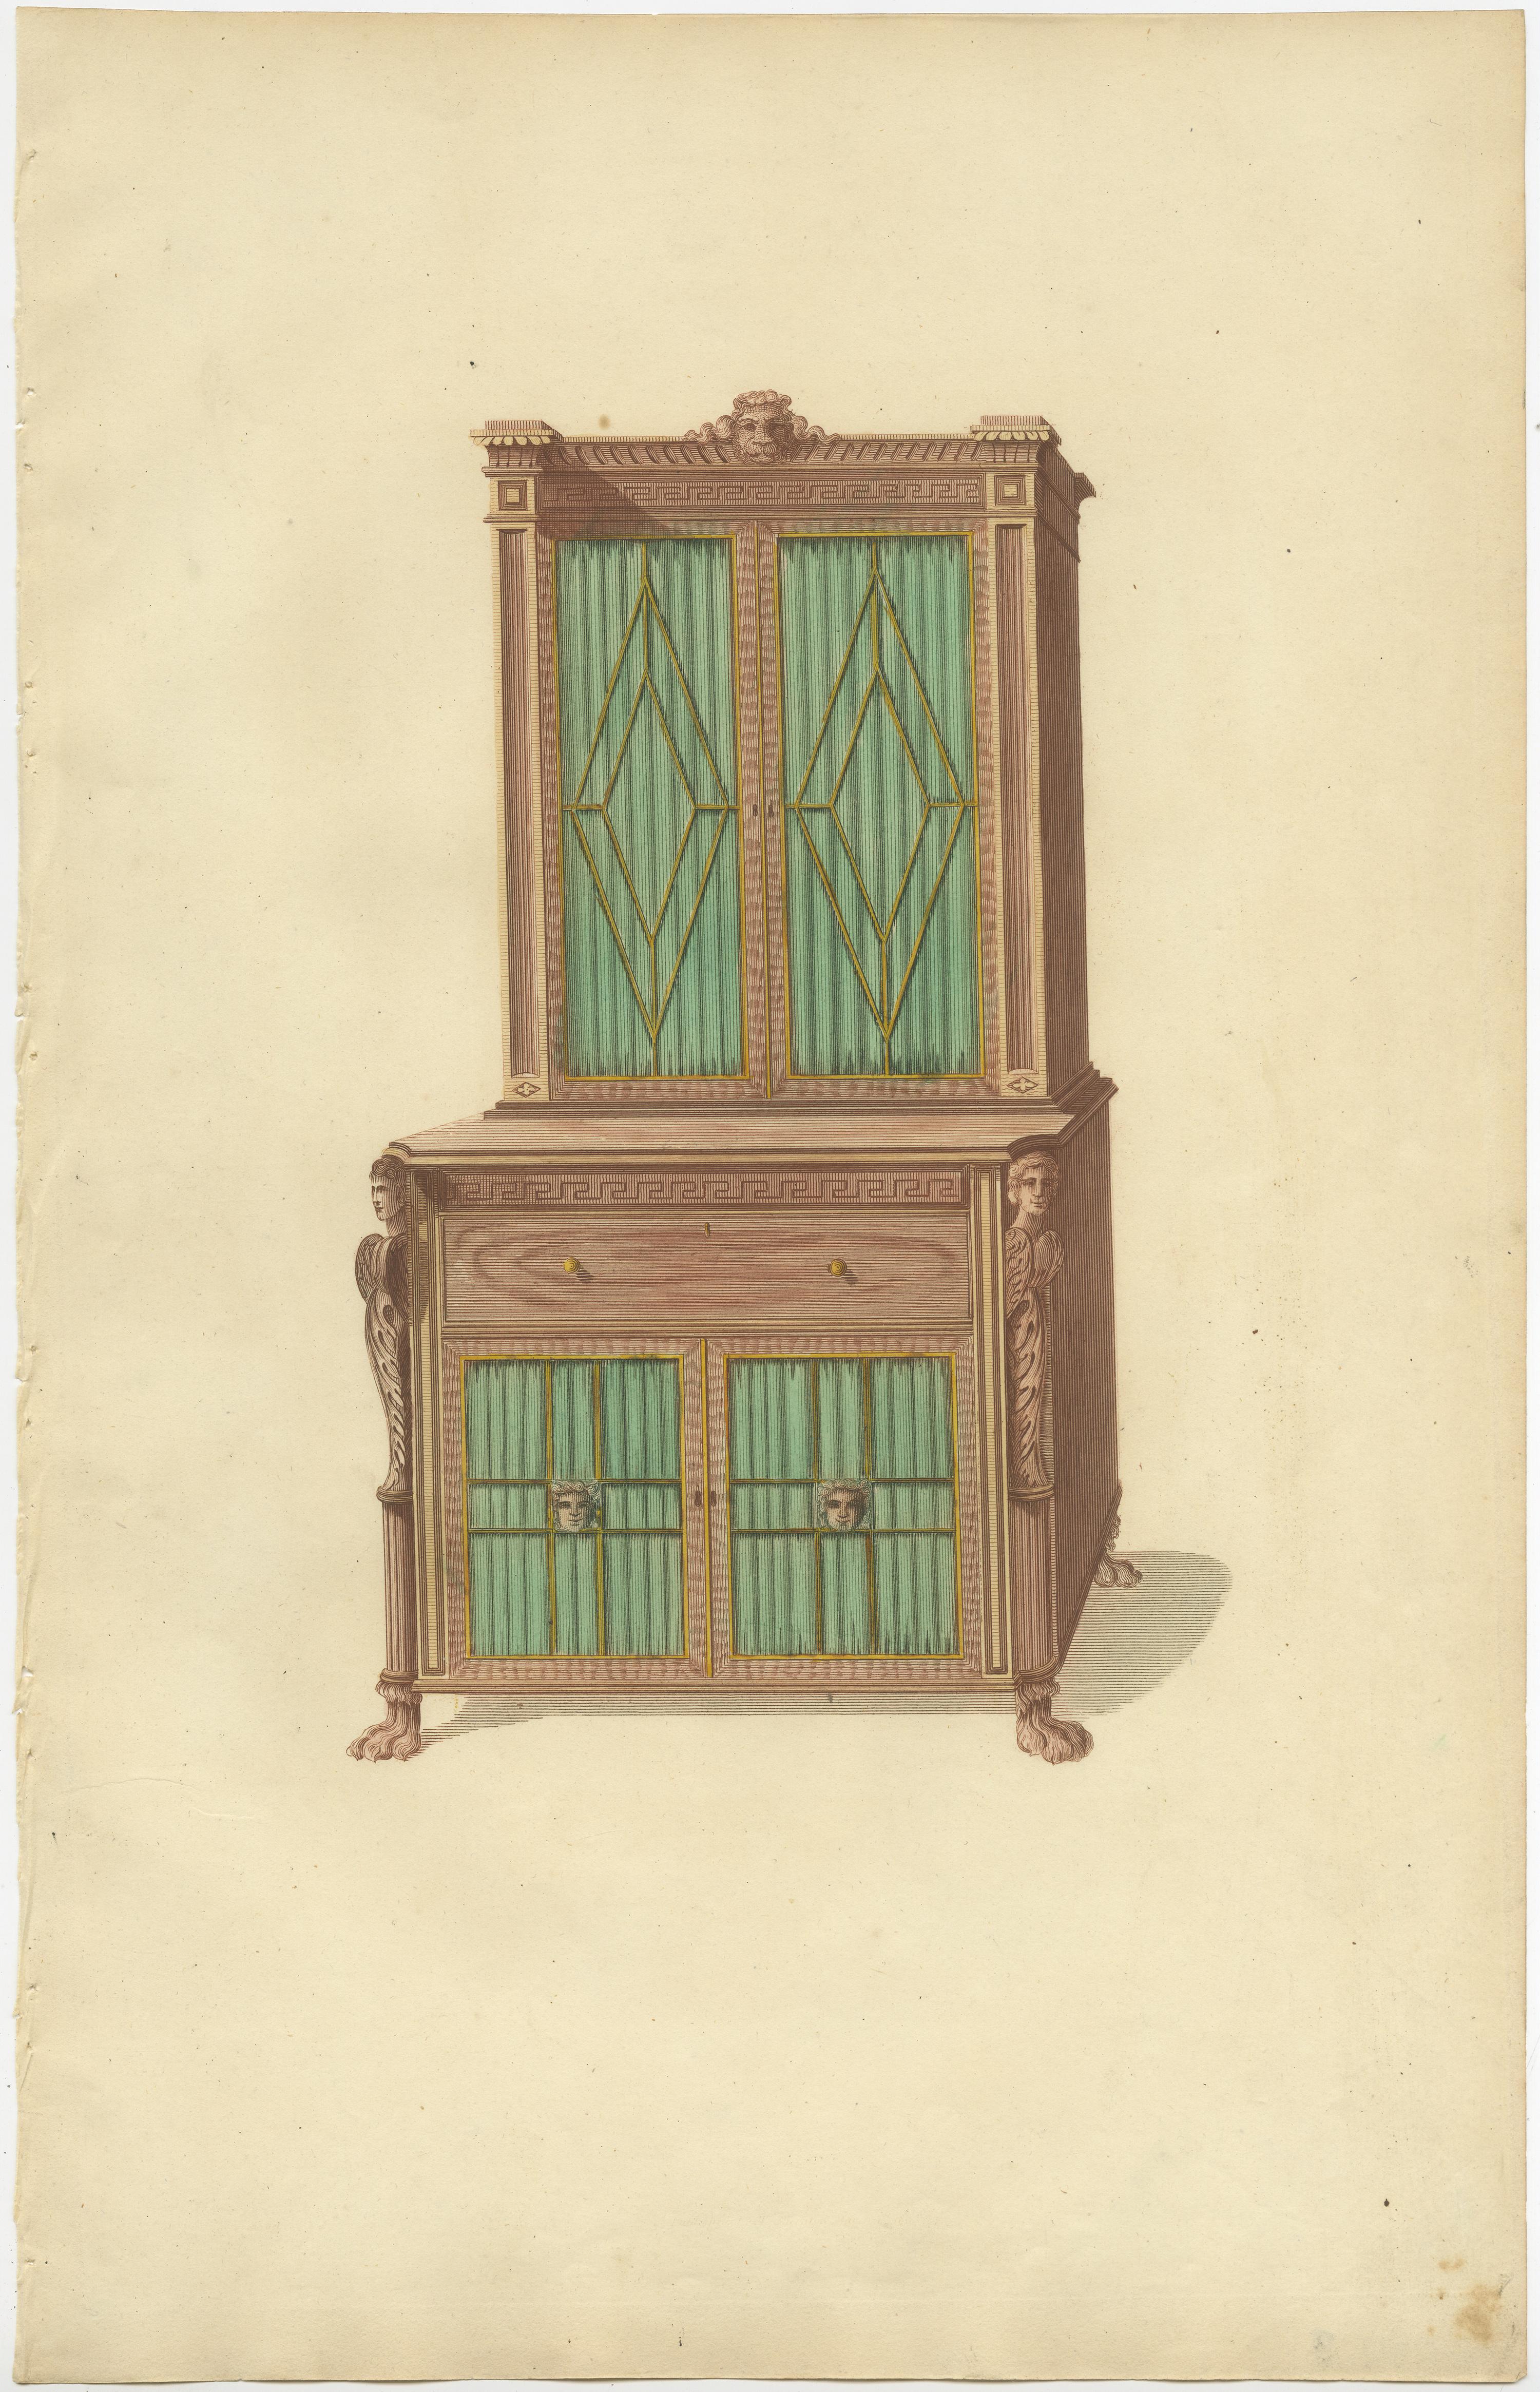 Set of ten antique prints of cabinets and other furniture. These prints originate from 'The General Artist's Encyclopaedia' by Thomas Sheraton. Published 1803-1805.